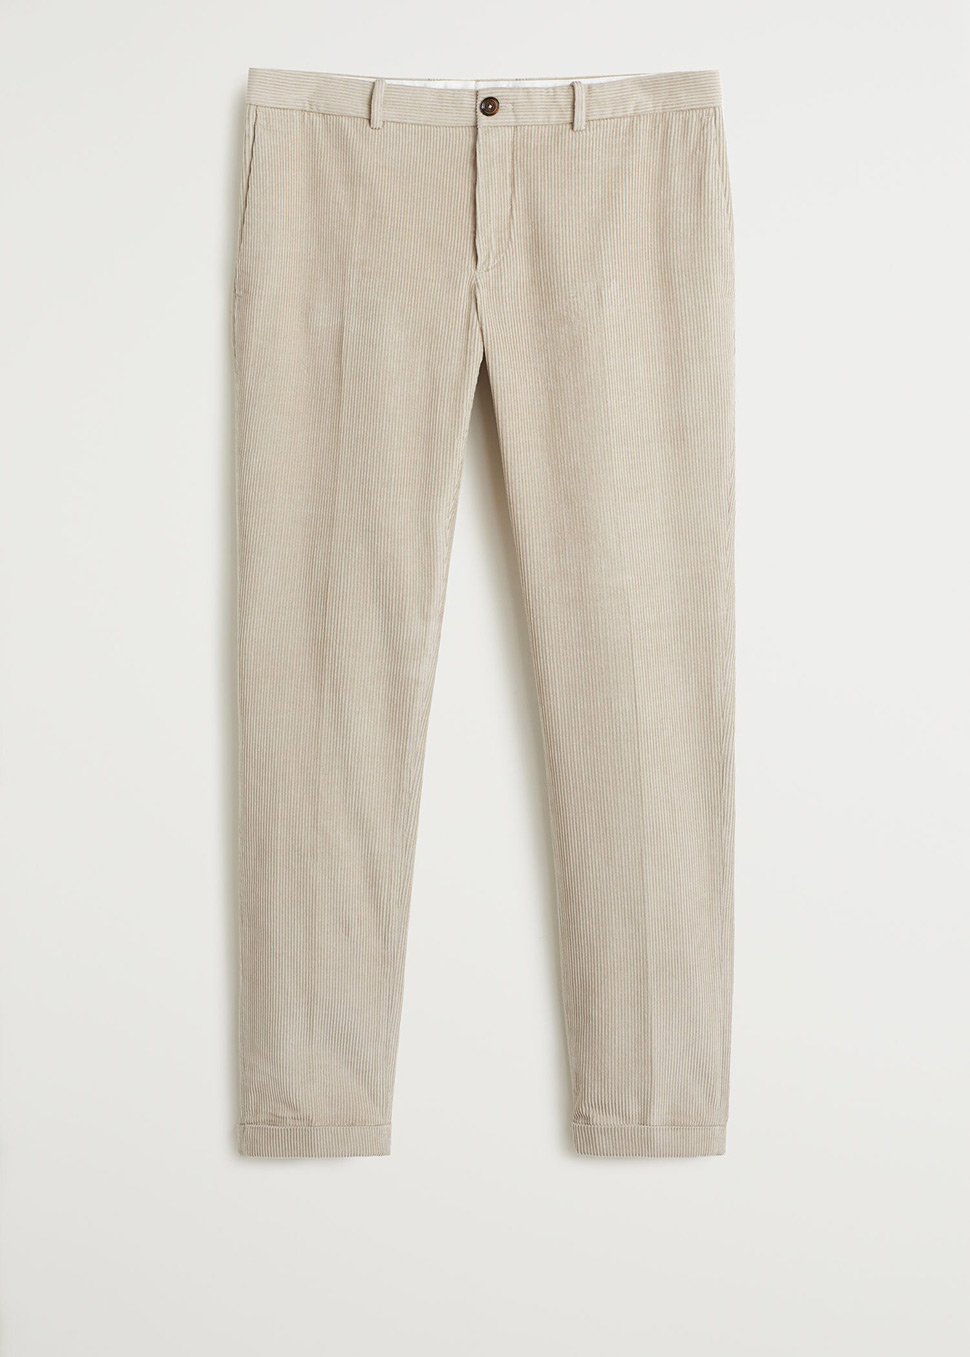 The Best Corduroy Pants - Top Corduroy Pants To Buy Right Now